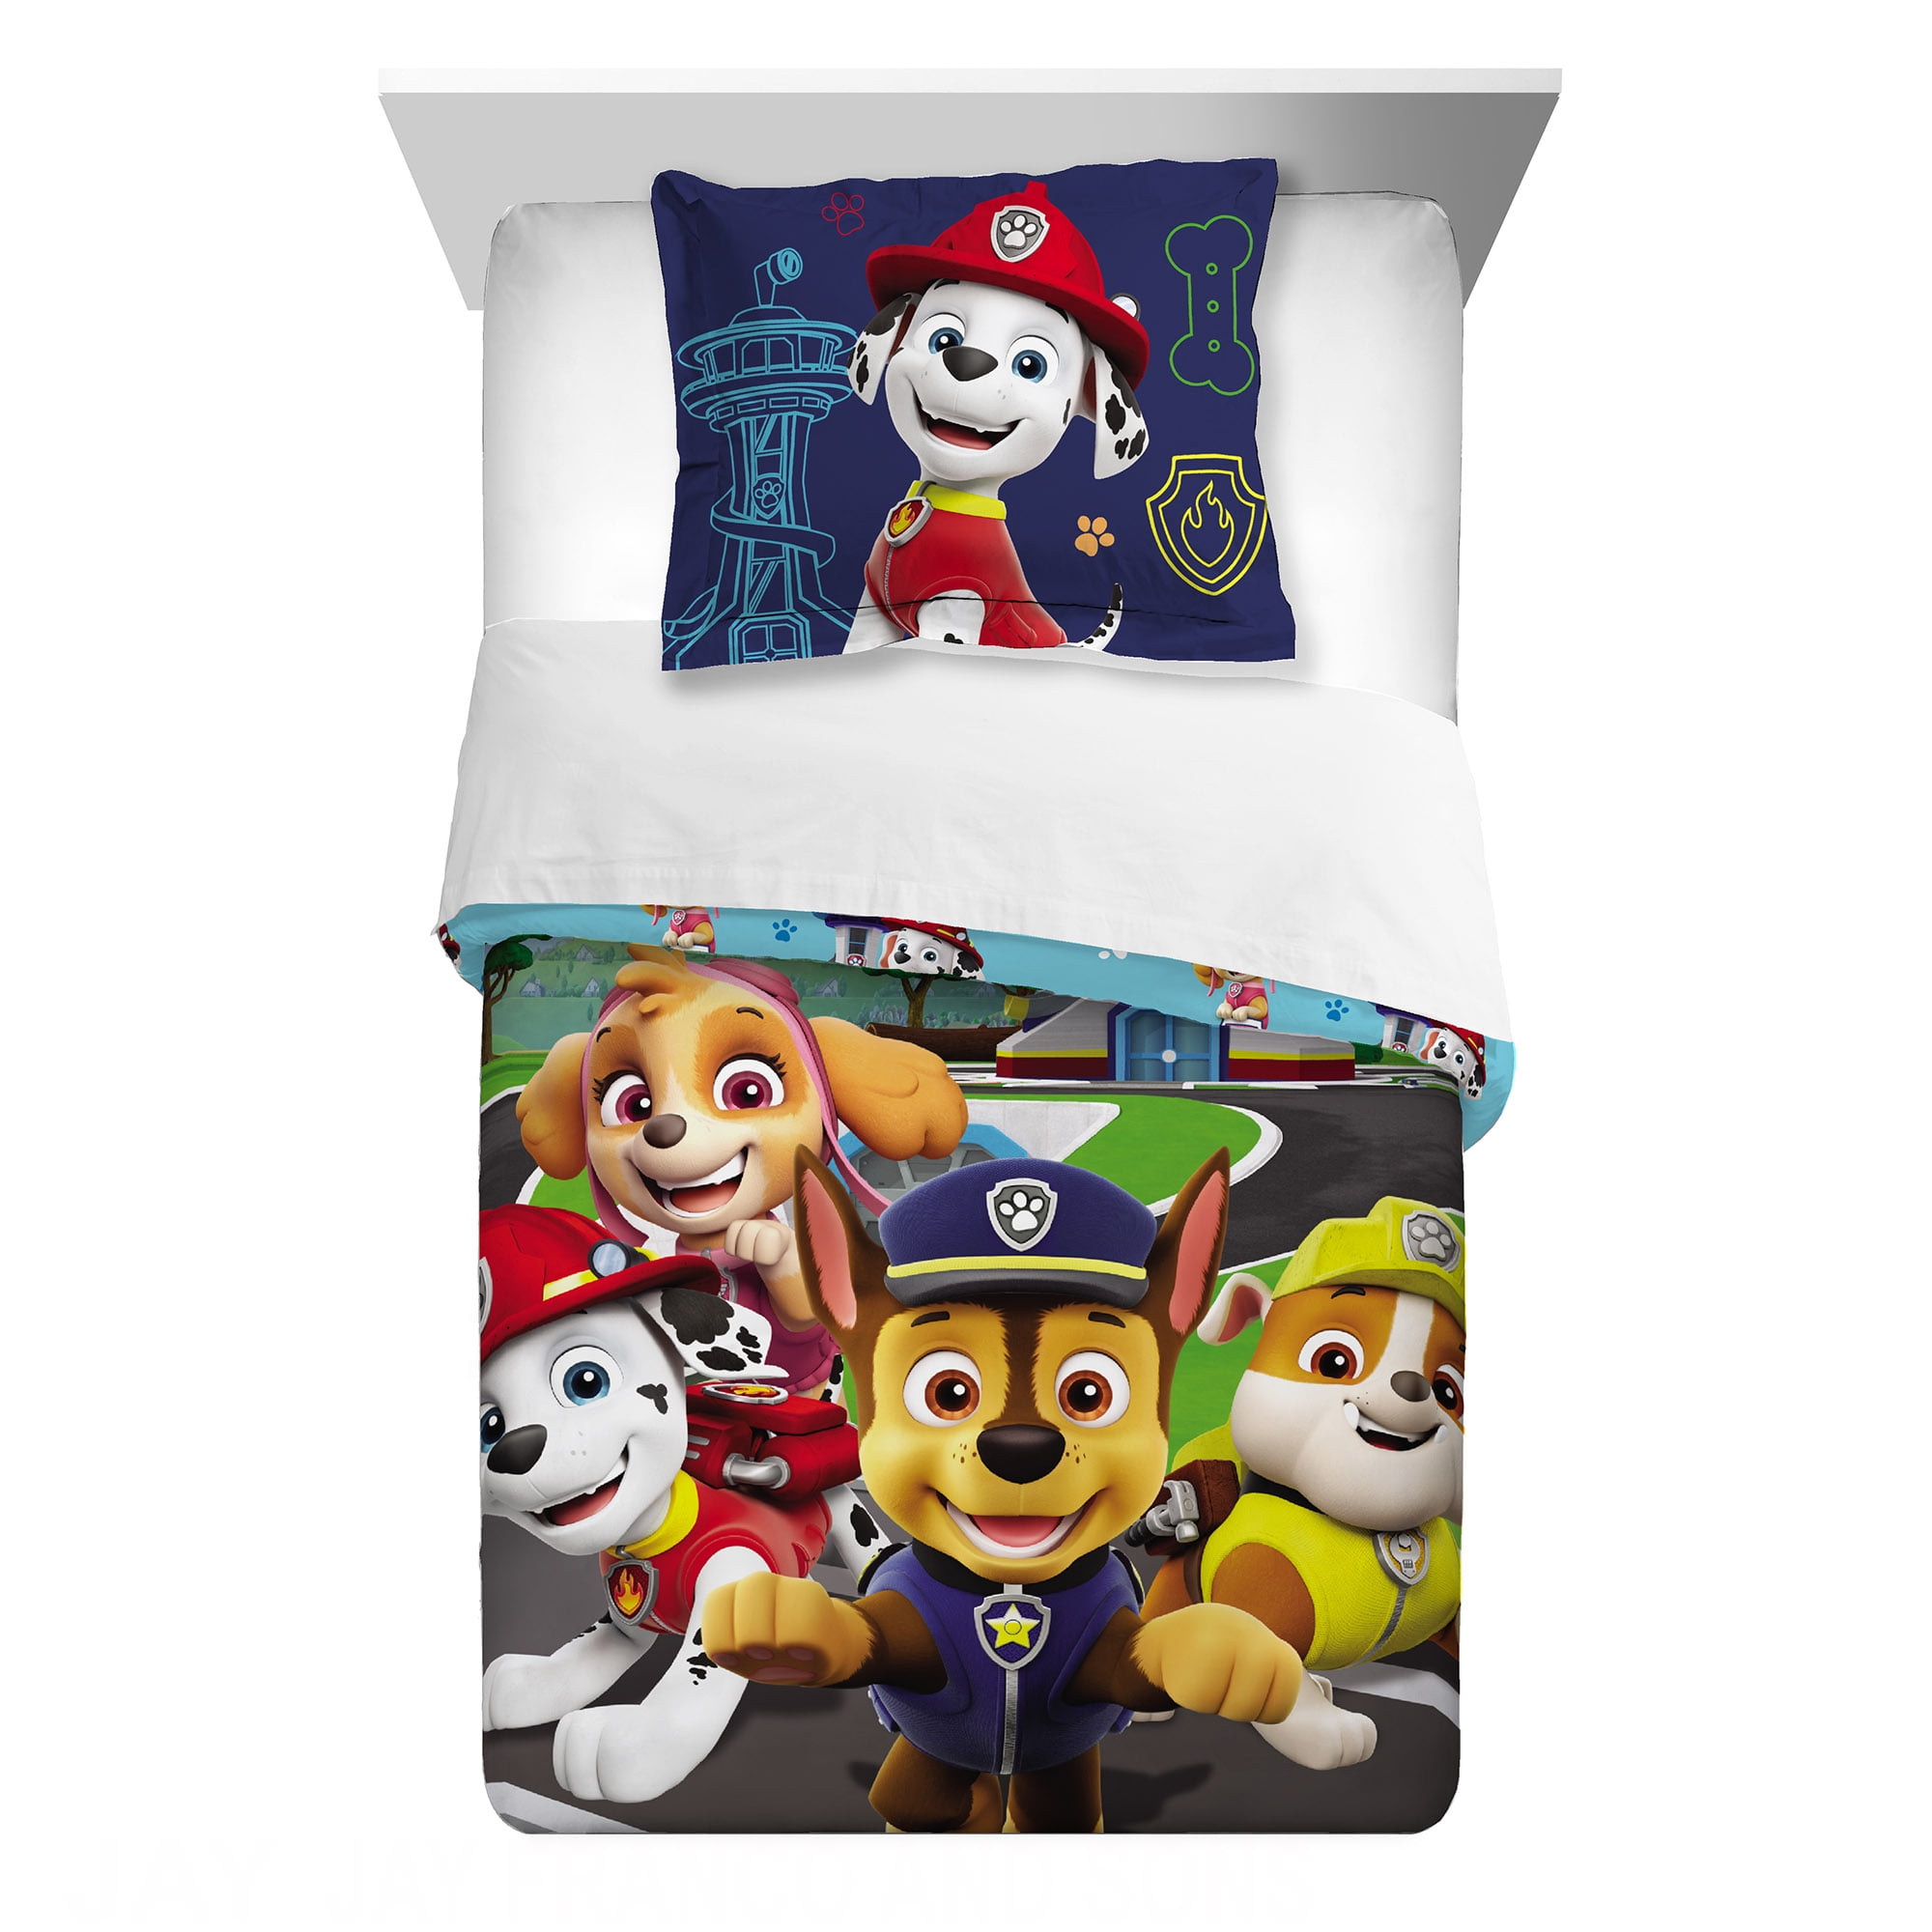 NEW PAW PATROL DUVET QUILT COVER SET GIRLS BOYS IN SINGLE COT BED SIZE DOUBLE 